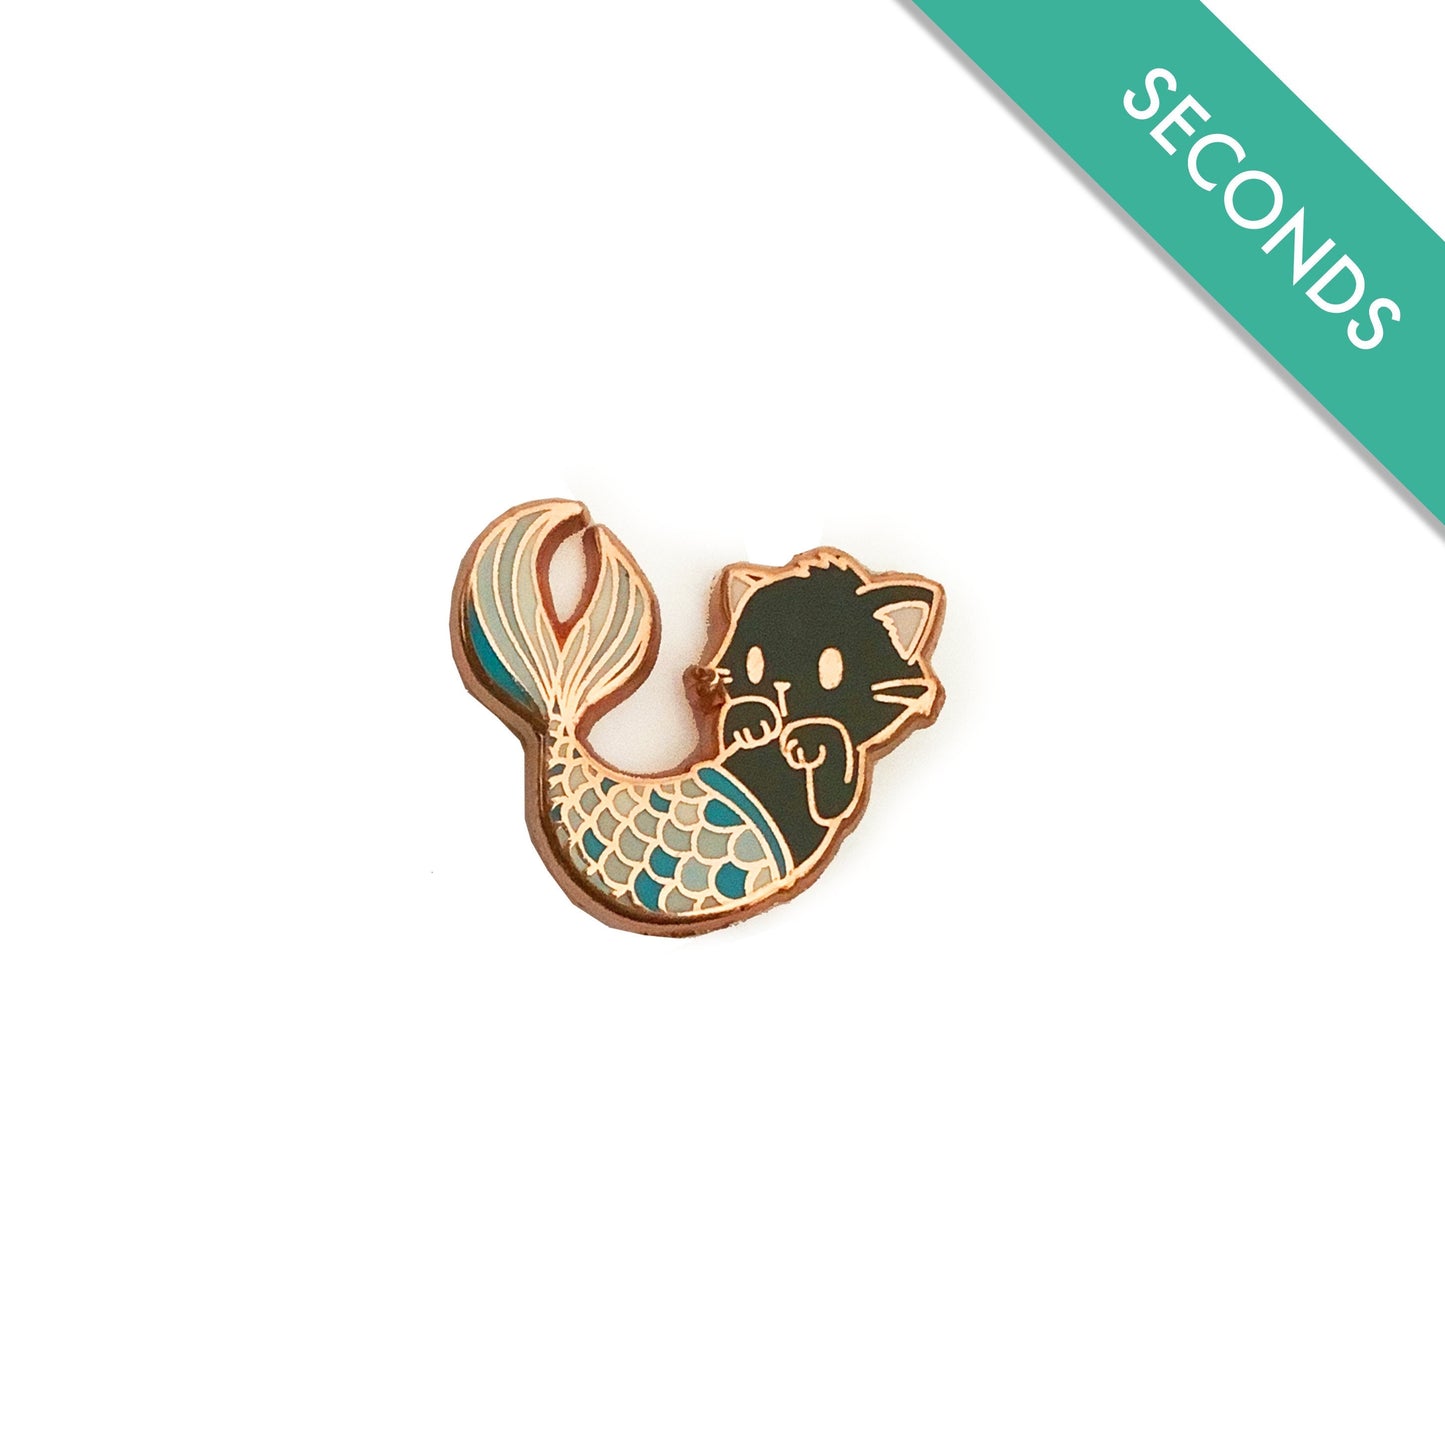 Purrmaid III Pin - Pin Seconds - Small Enamel Pin (Black Cat with Blue Tail)